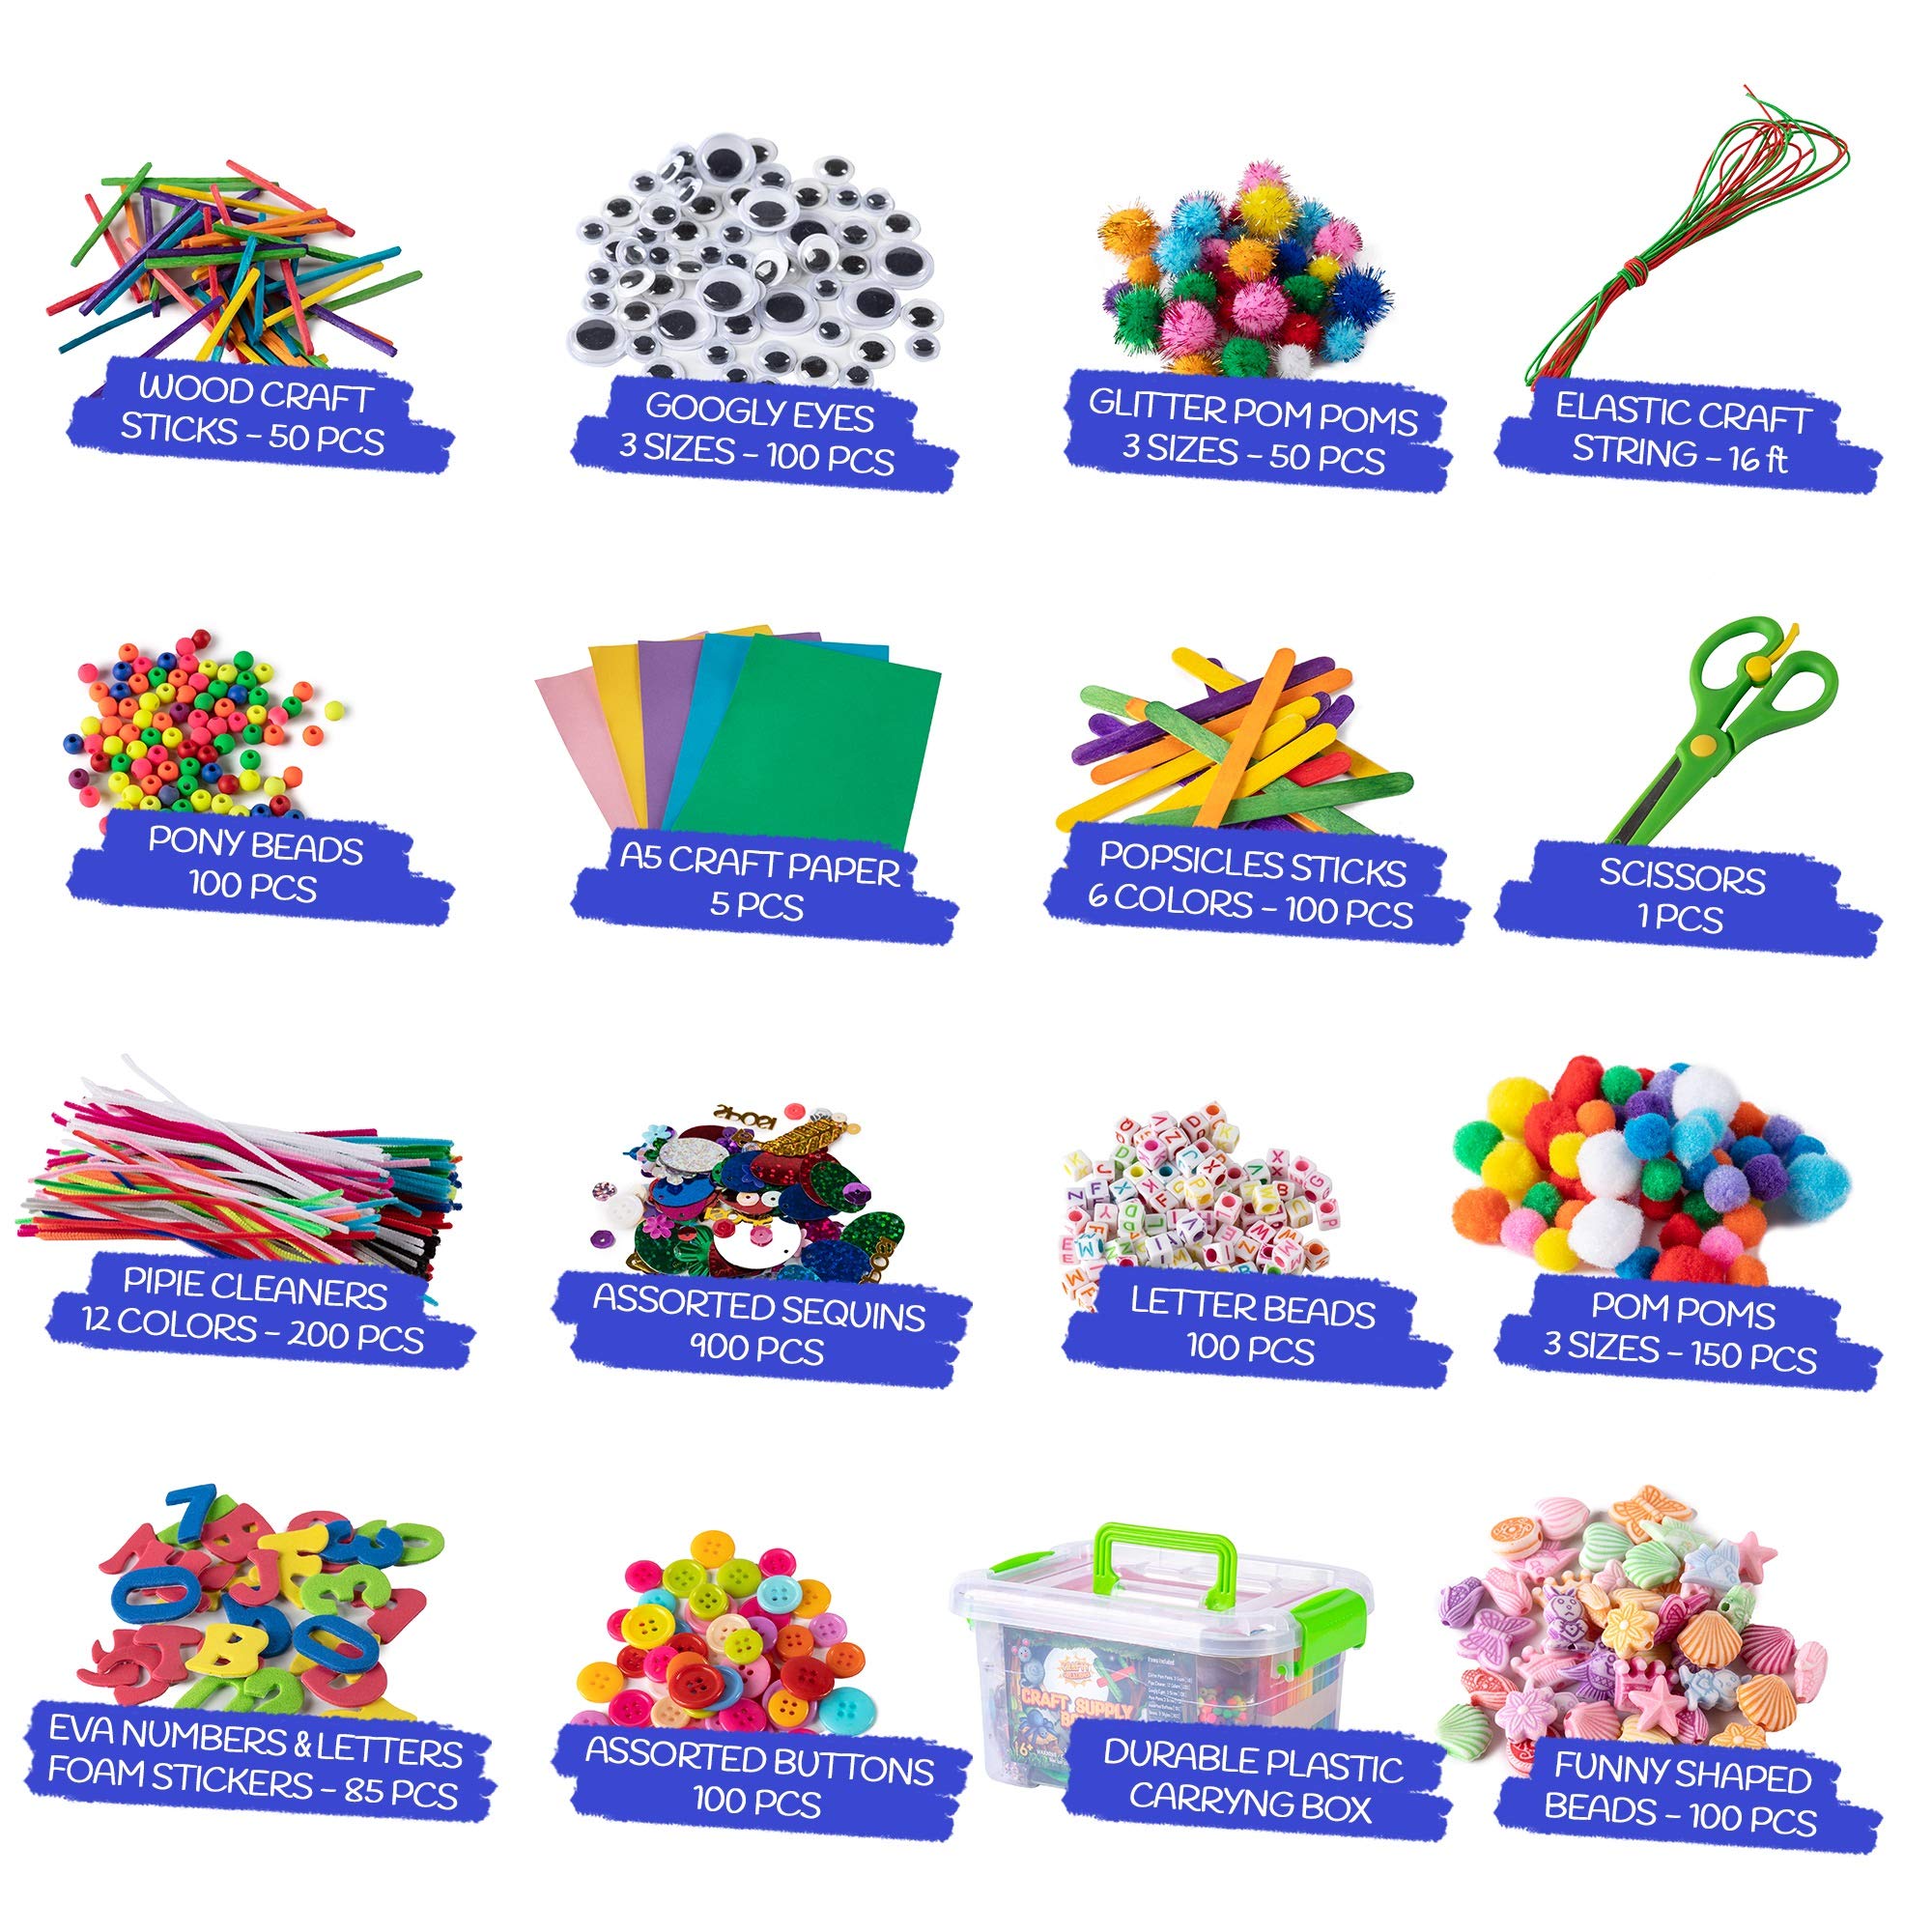 Jumbo Arts & Crafts Kit Box - 2,000+ Pieces Pompoms, Craft Sticks, Pipe Cleaners, Scissors, & More in Large Craft Box - Art Supplies Set for Adults & Kids Age 6,7,8,9,10,11,12 - Large Organizer Box